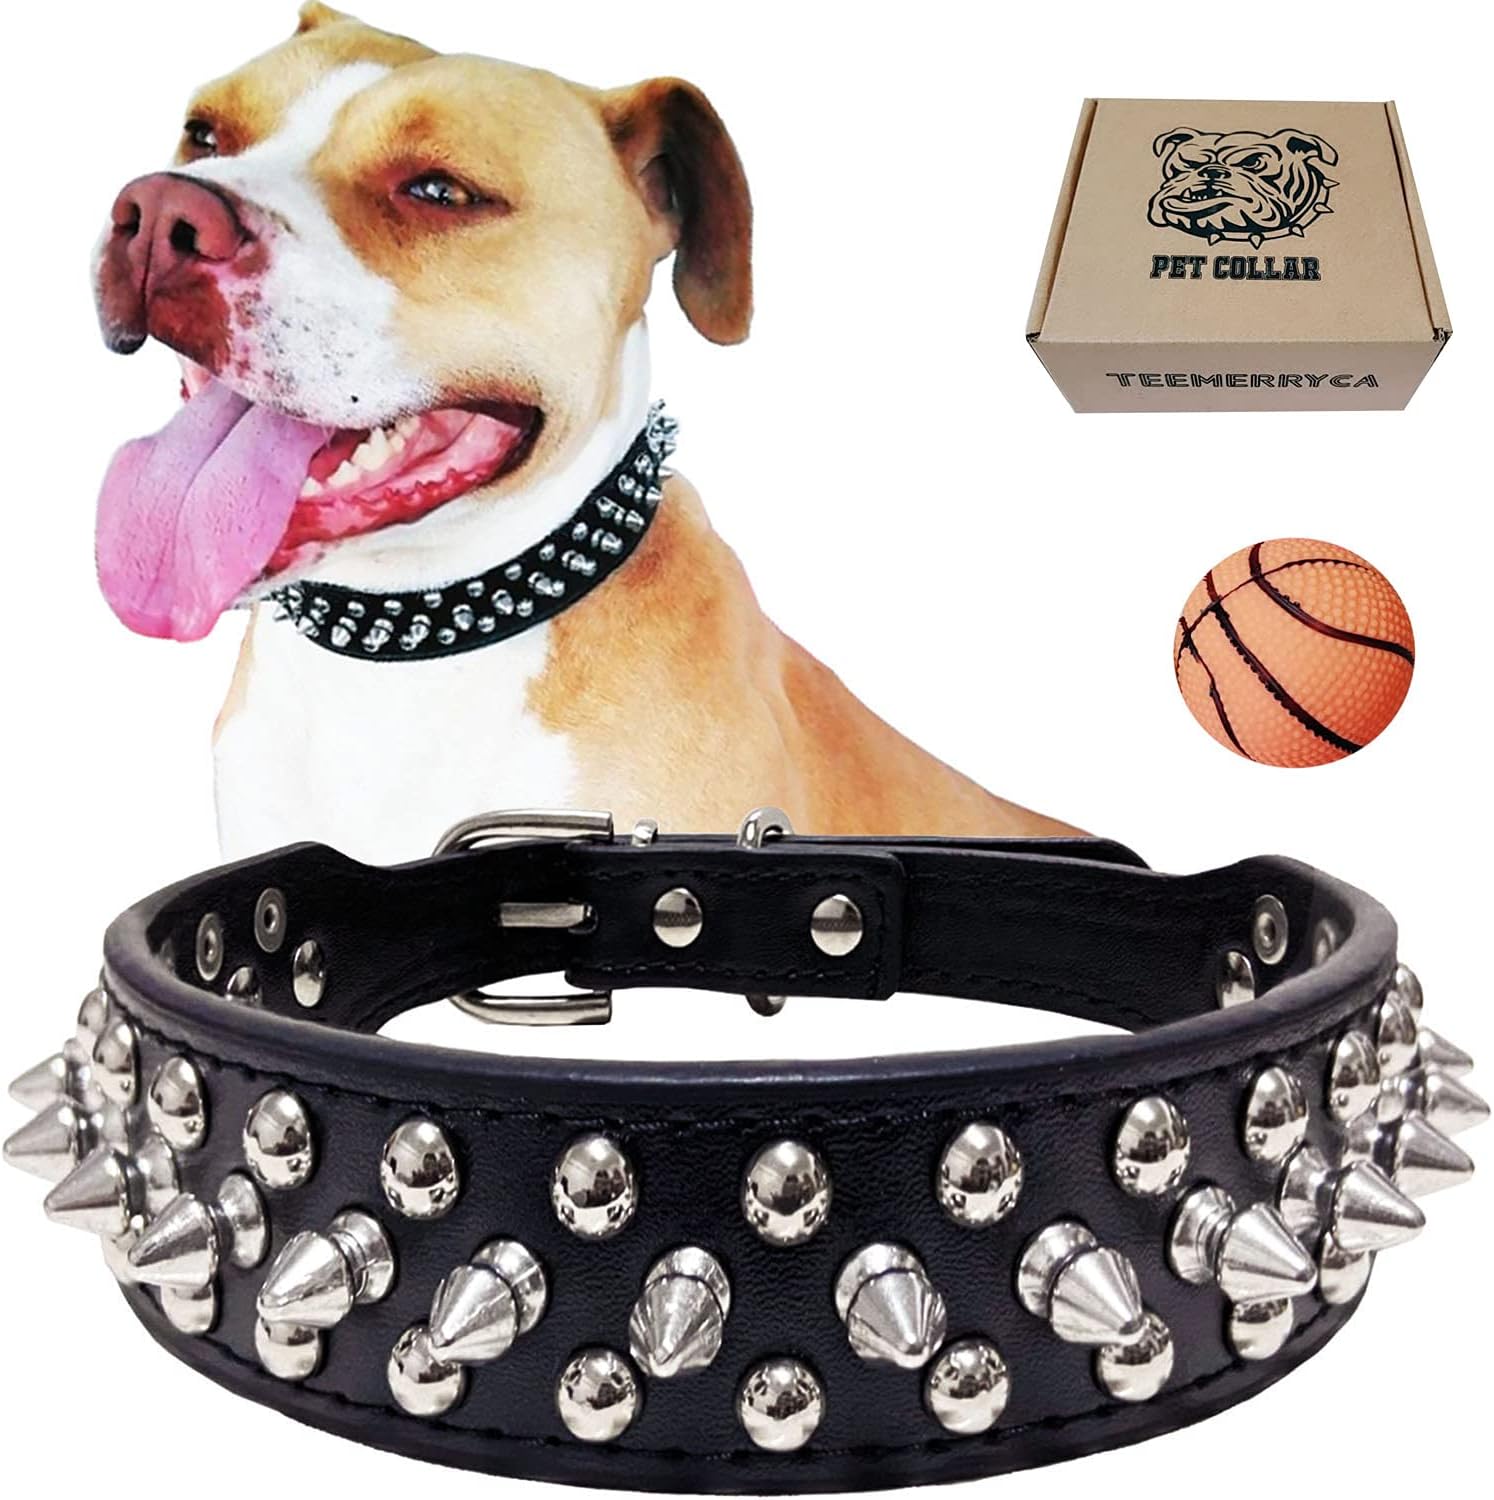 Adjustable Microfiber Leather Spiked Studded Dog Collars with a Squeak Ball Gift for Small Medium Large Pets (15